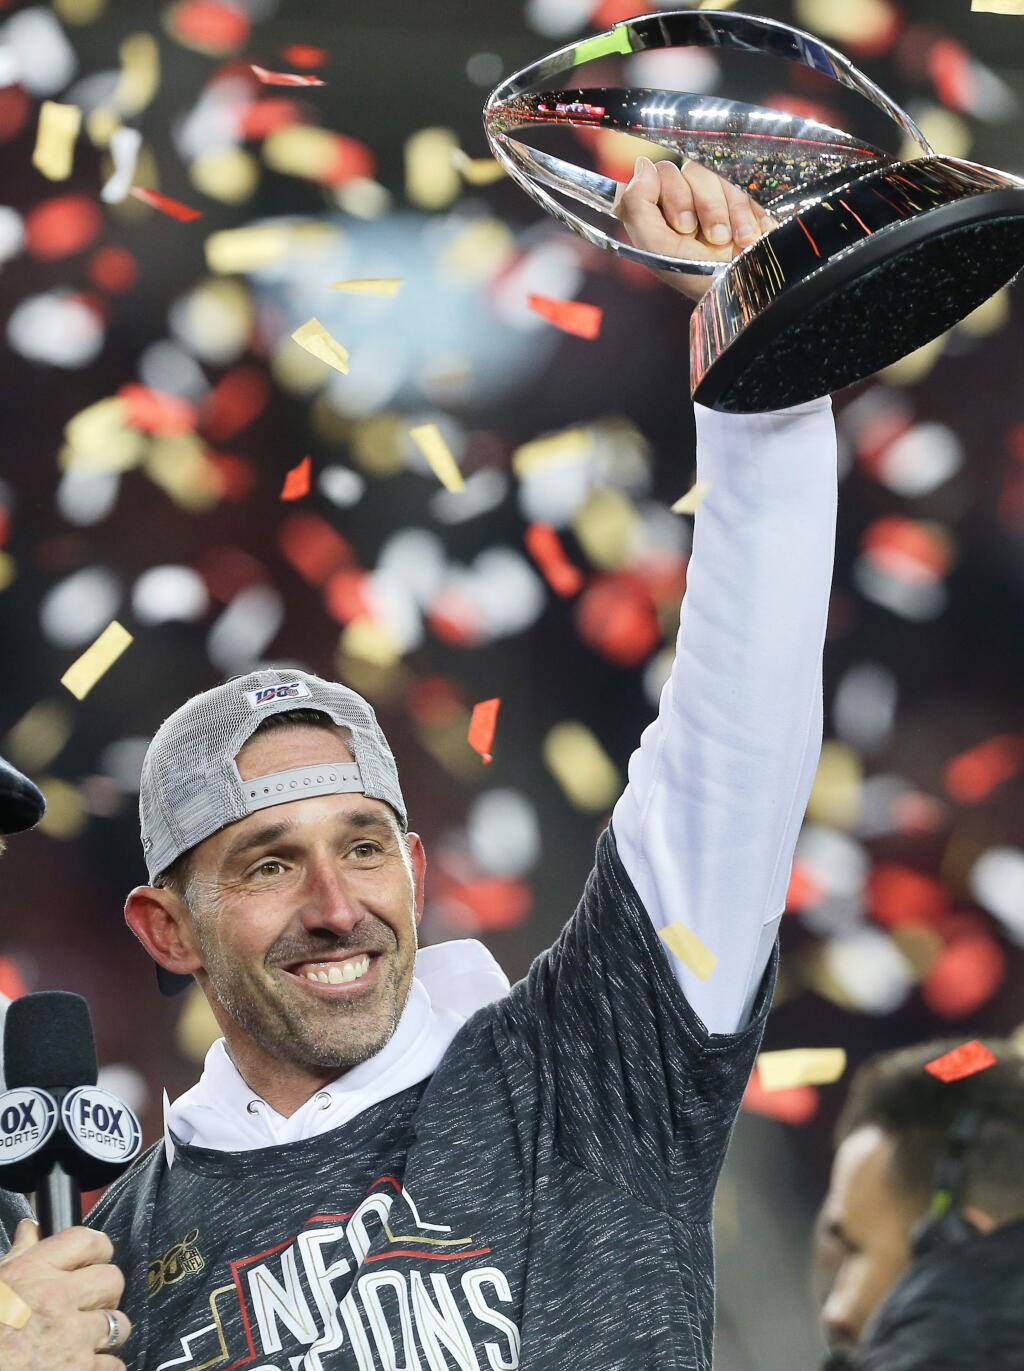 San Francisco 49ers head coach Kyle Shanahan lifts the George Halas Trophy after winning NFC Championship game against the Green Bay Packers at Levi's Stadium in Santa Clara on Sunday, January 19, 2020. The 49ers defeated the Packers 37-20.(Christopher Chung/ The Press Democrat)